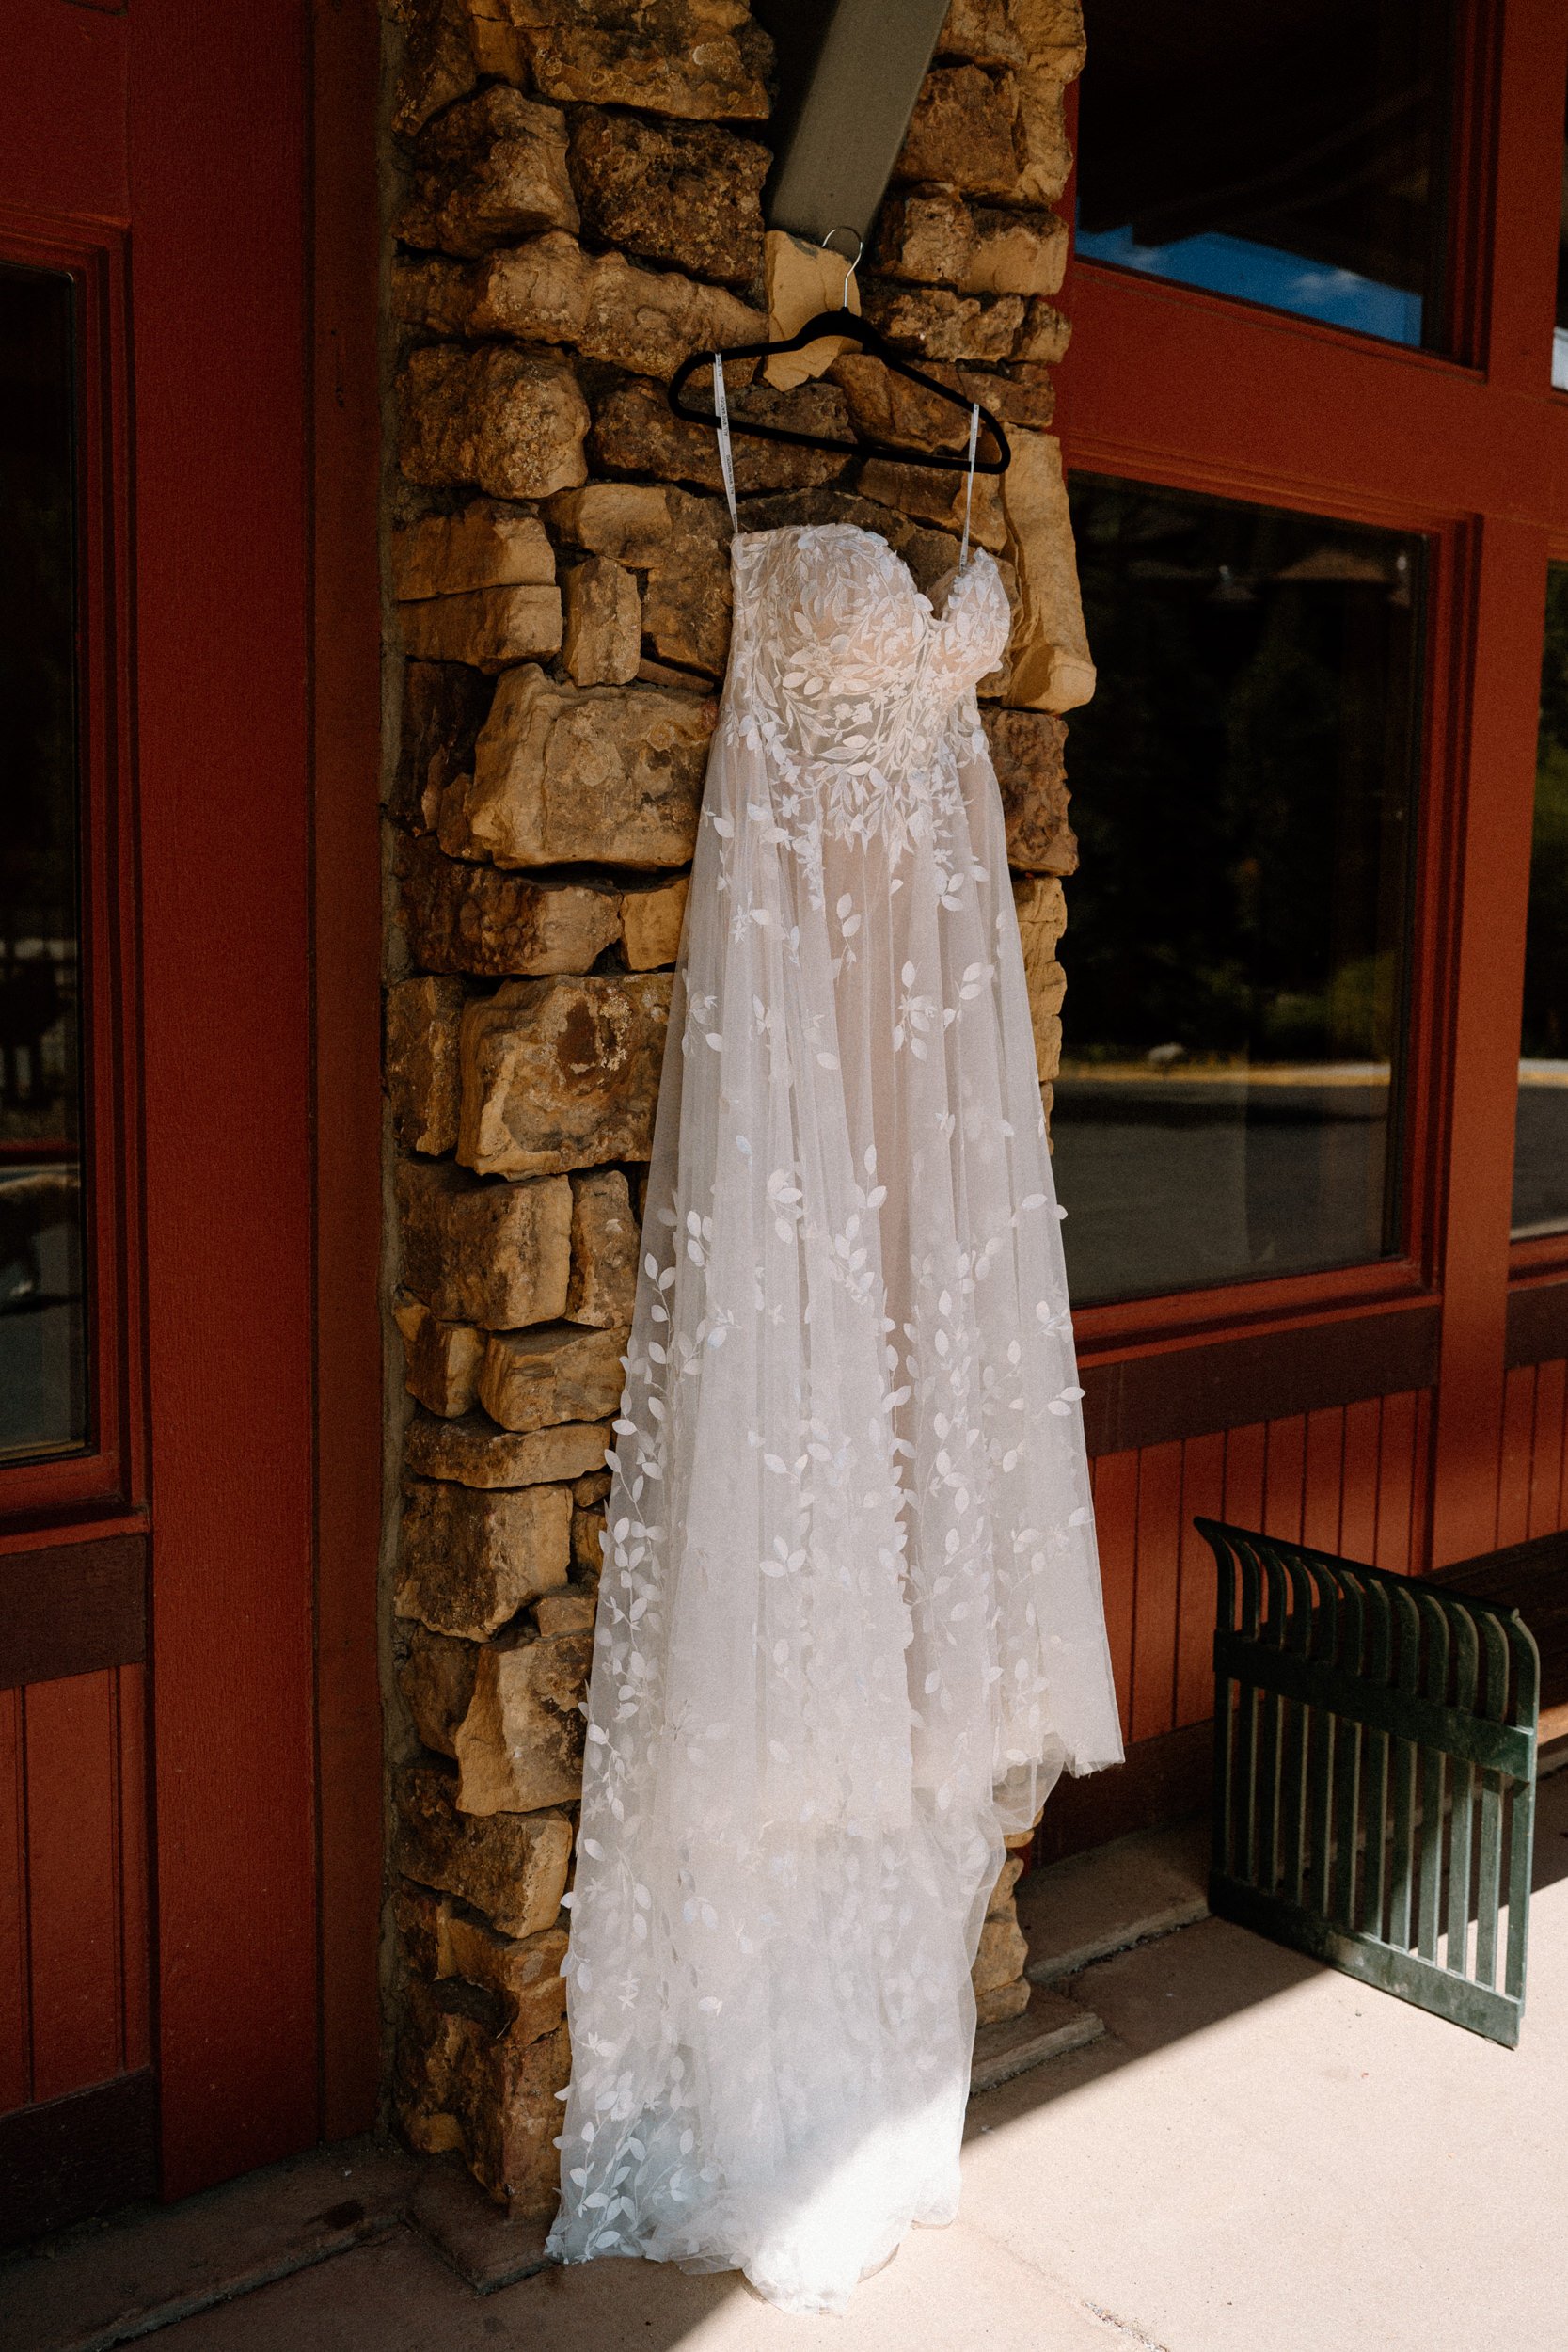 A white wedding dress hangs from a cabin frame